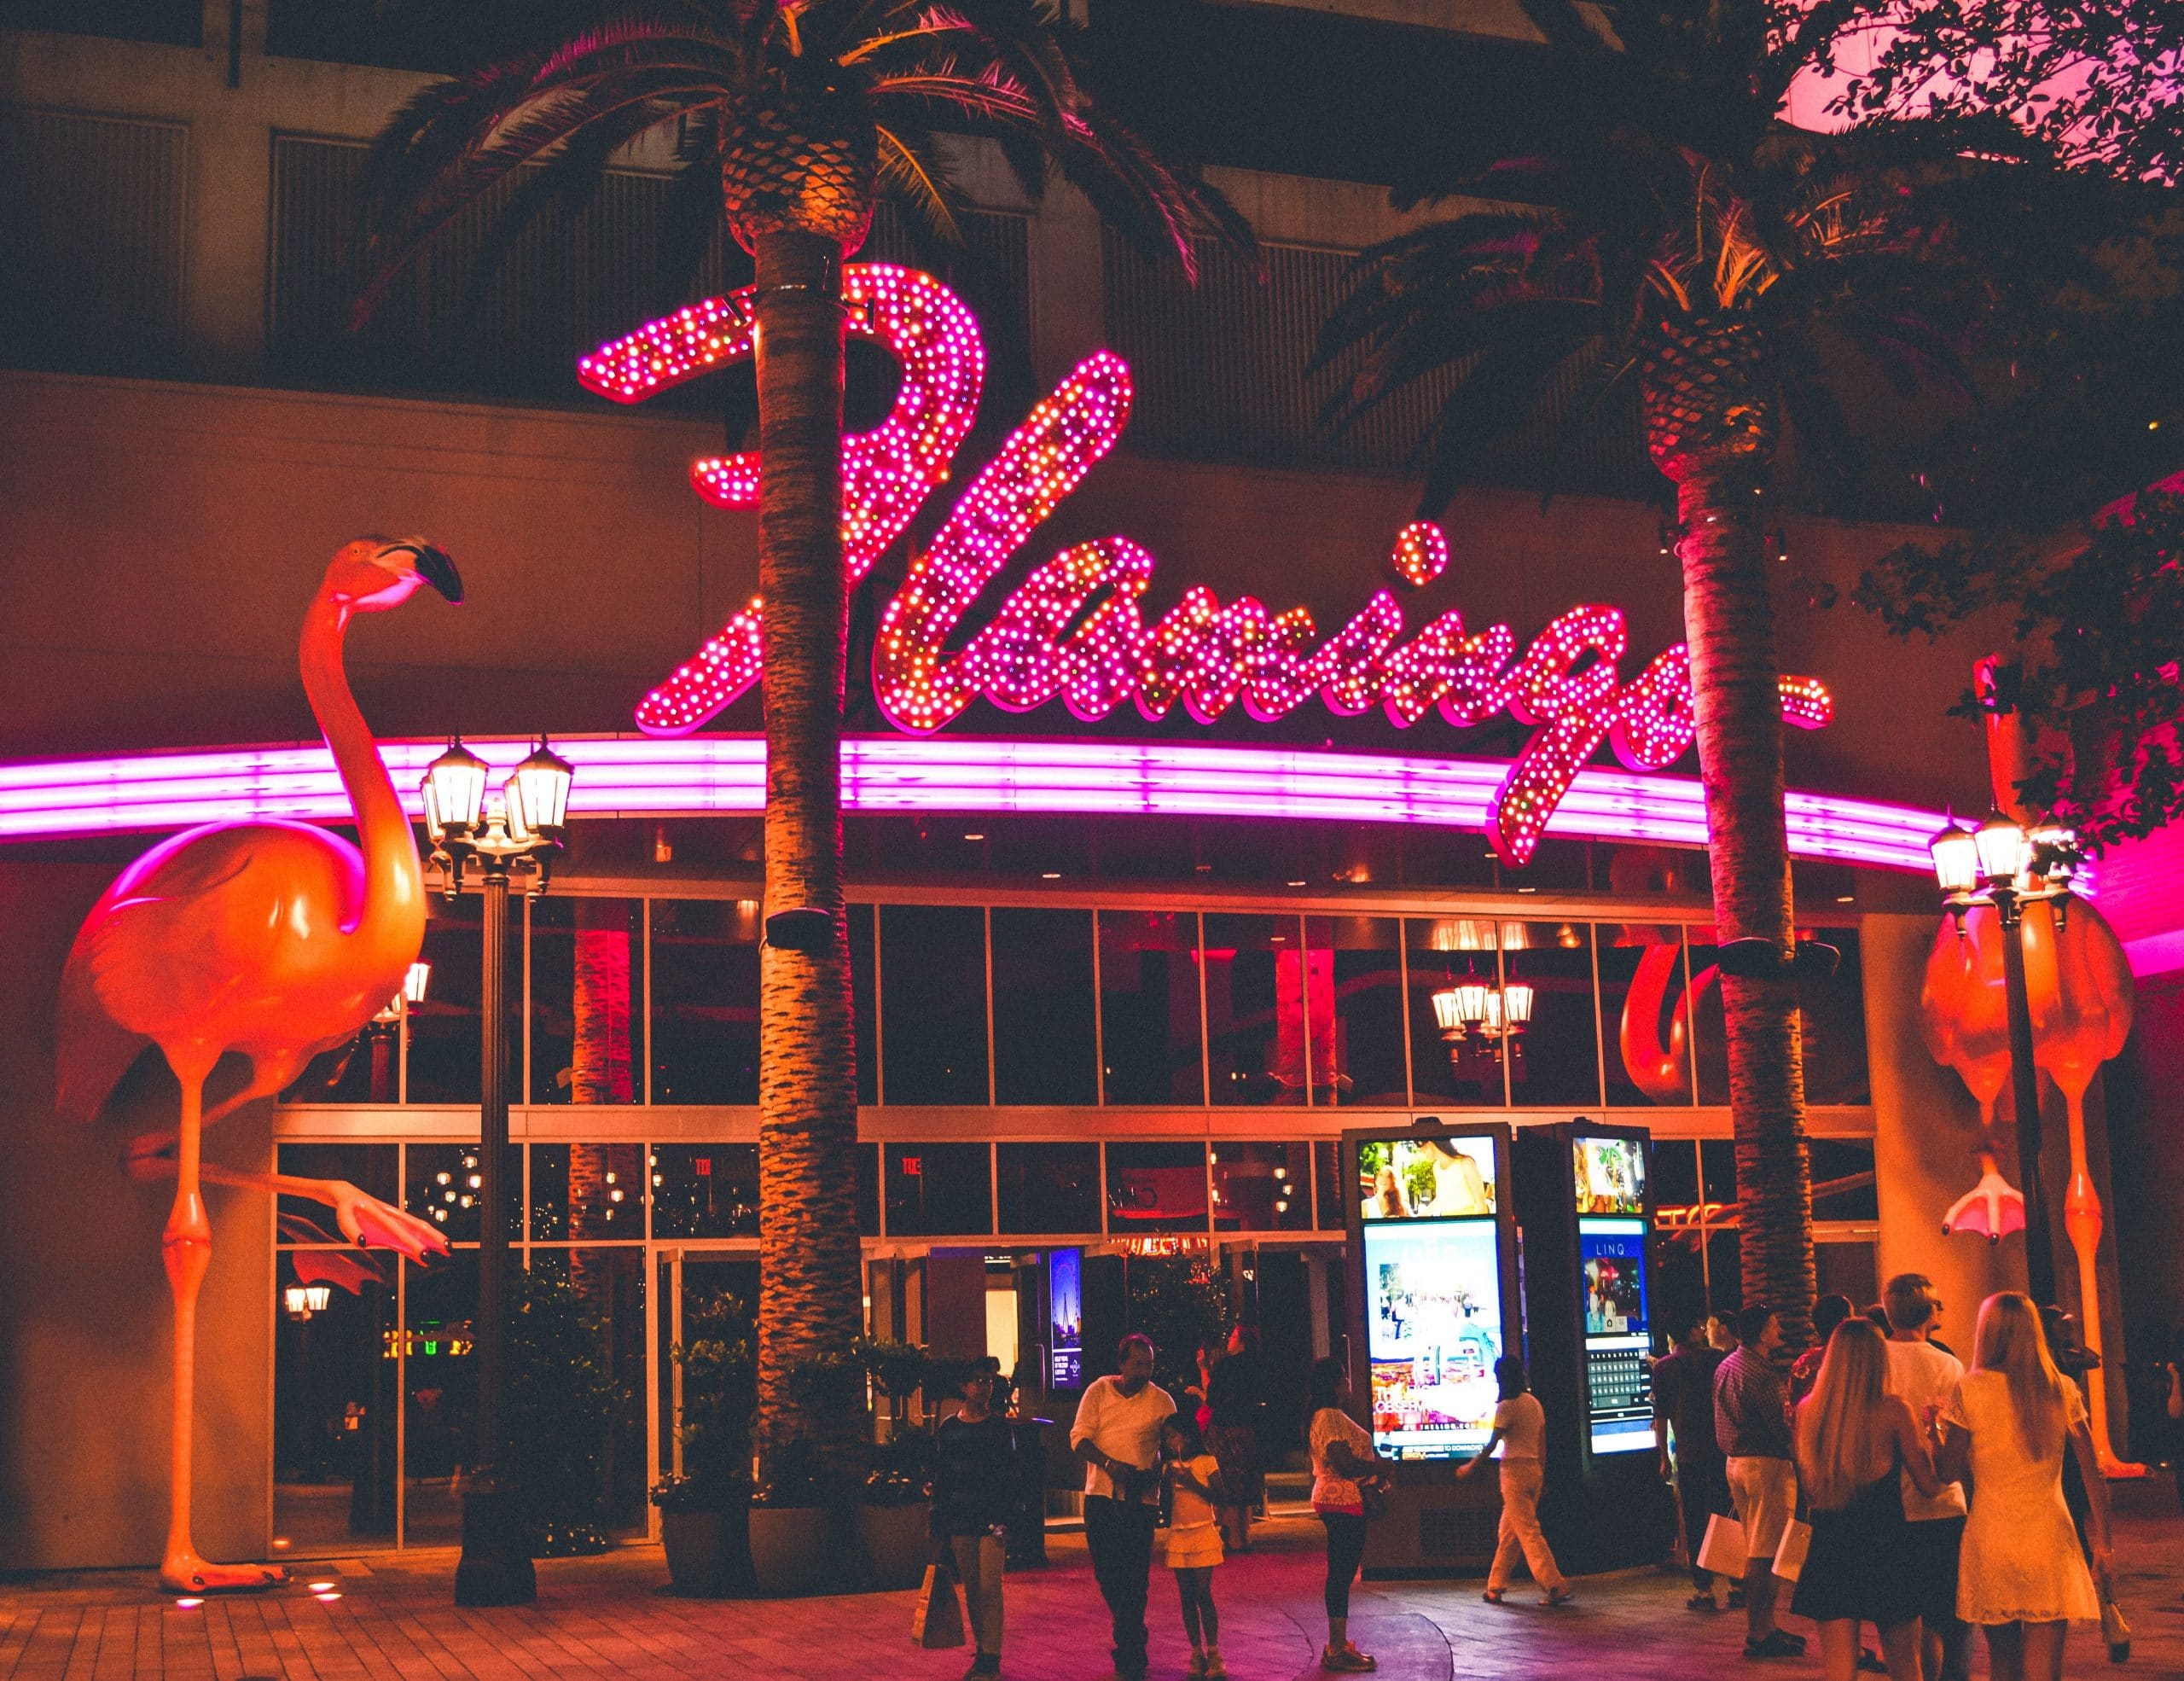 the oldest hotel on the las vegas strip is the flamingo